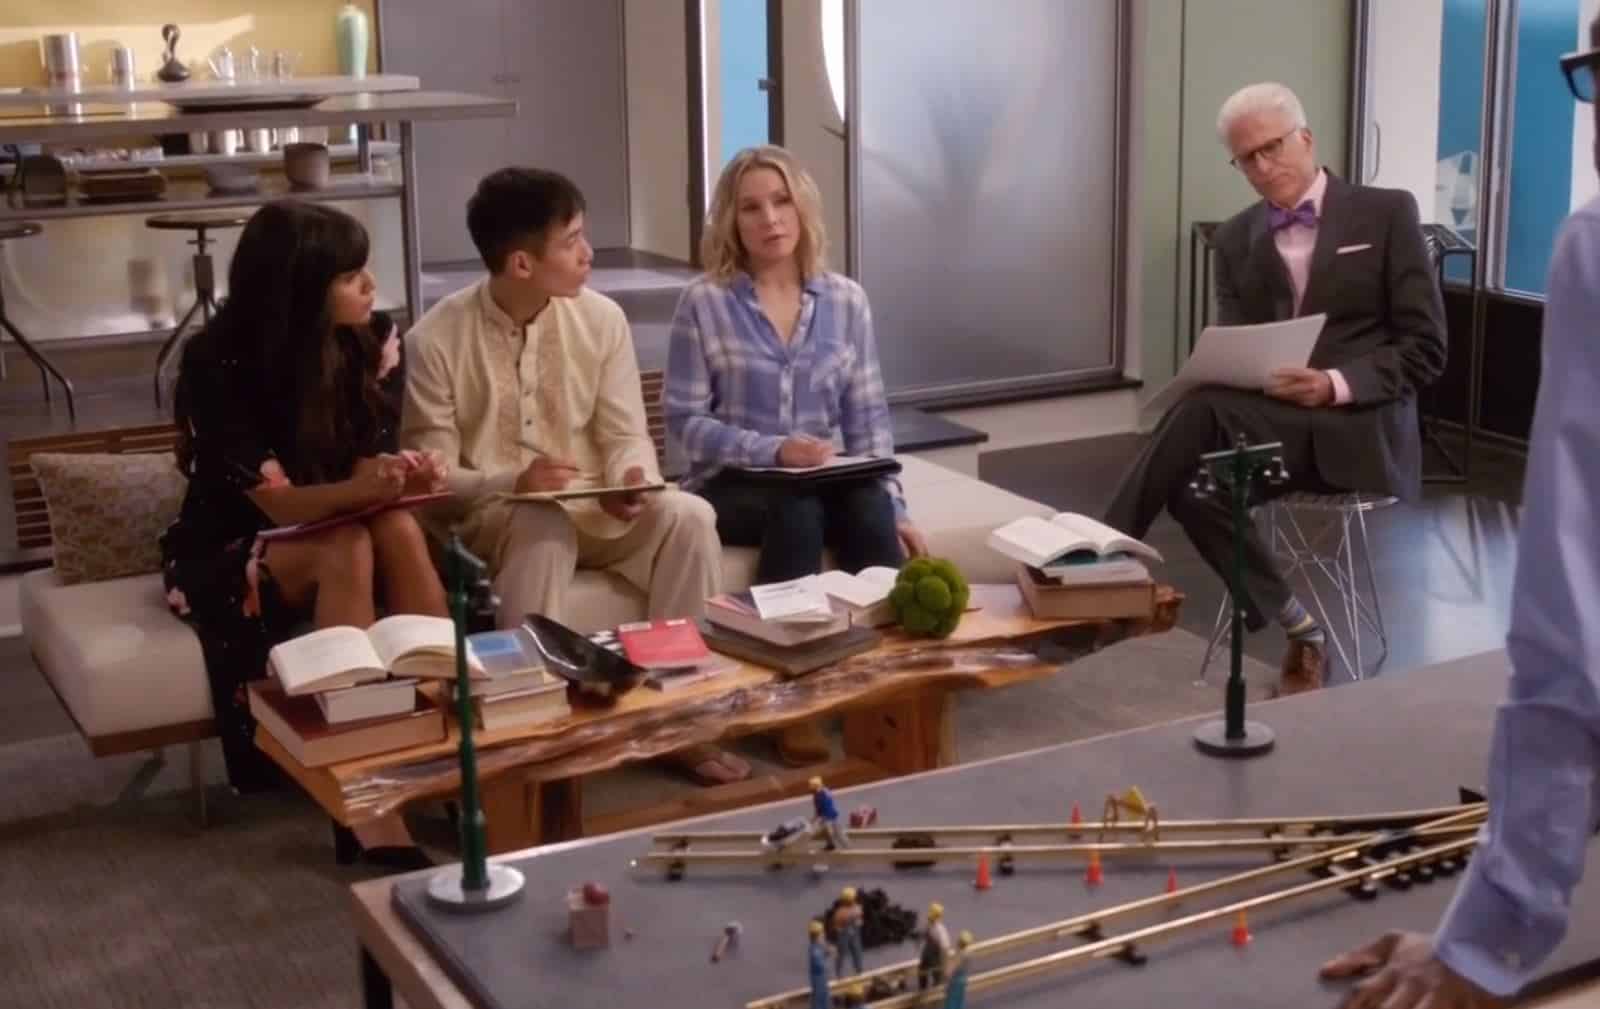 Ted Danson, Kristen Bell, William Jackson Harper, Manny Jacinto, and Jameela Jamil in The Good Place (2016)